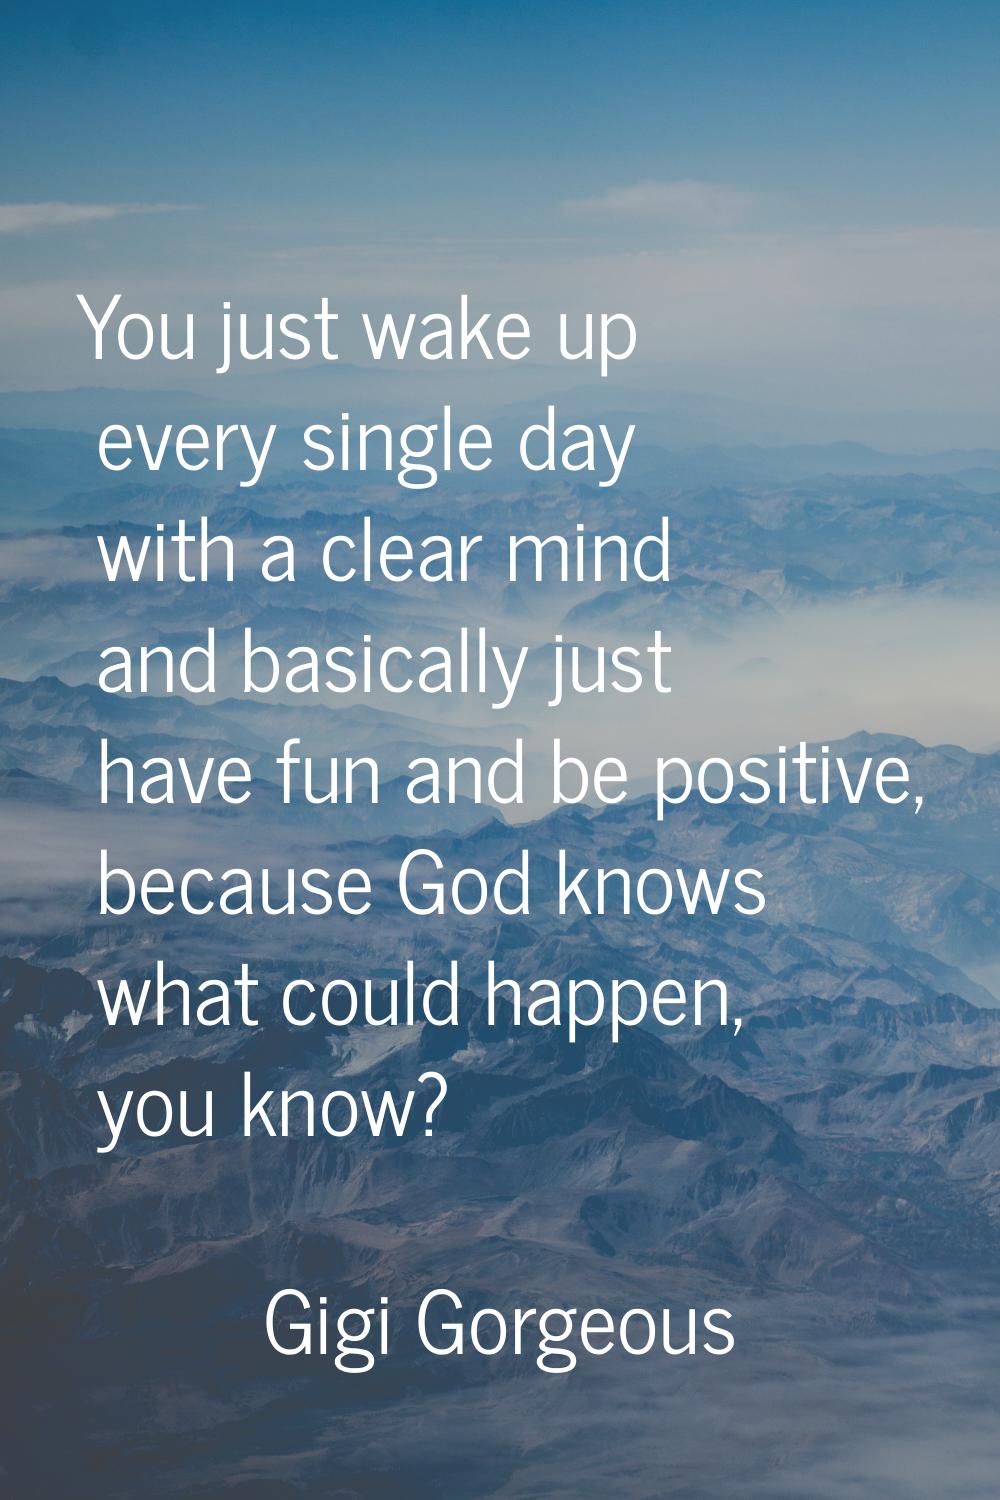 You just wake up every single day with a clear mind and basically just have fun and be positive, be